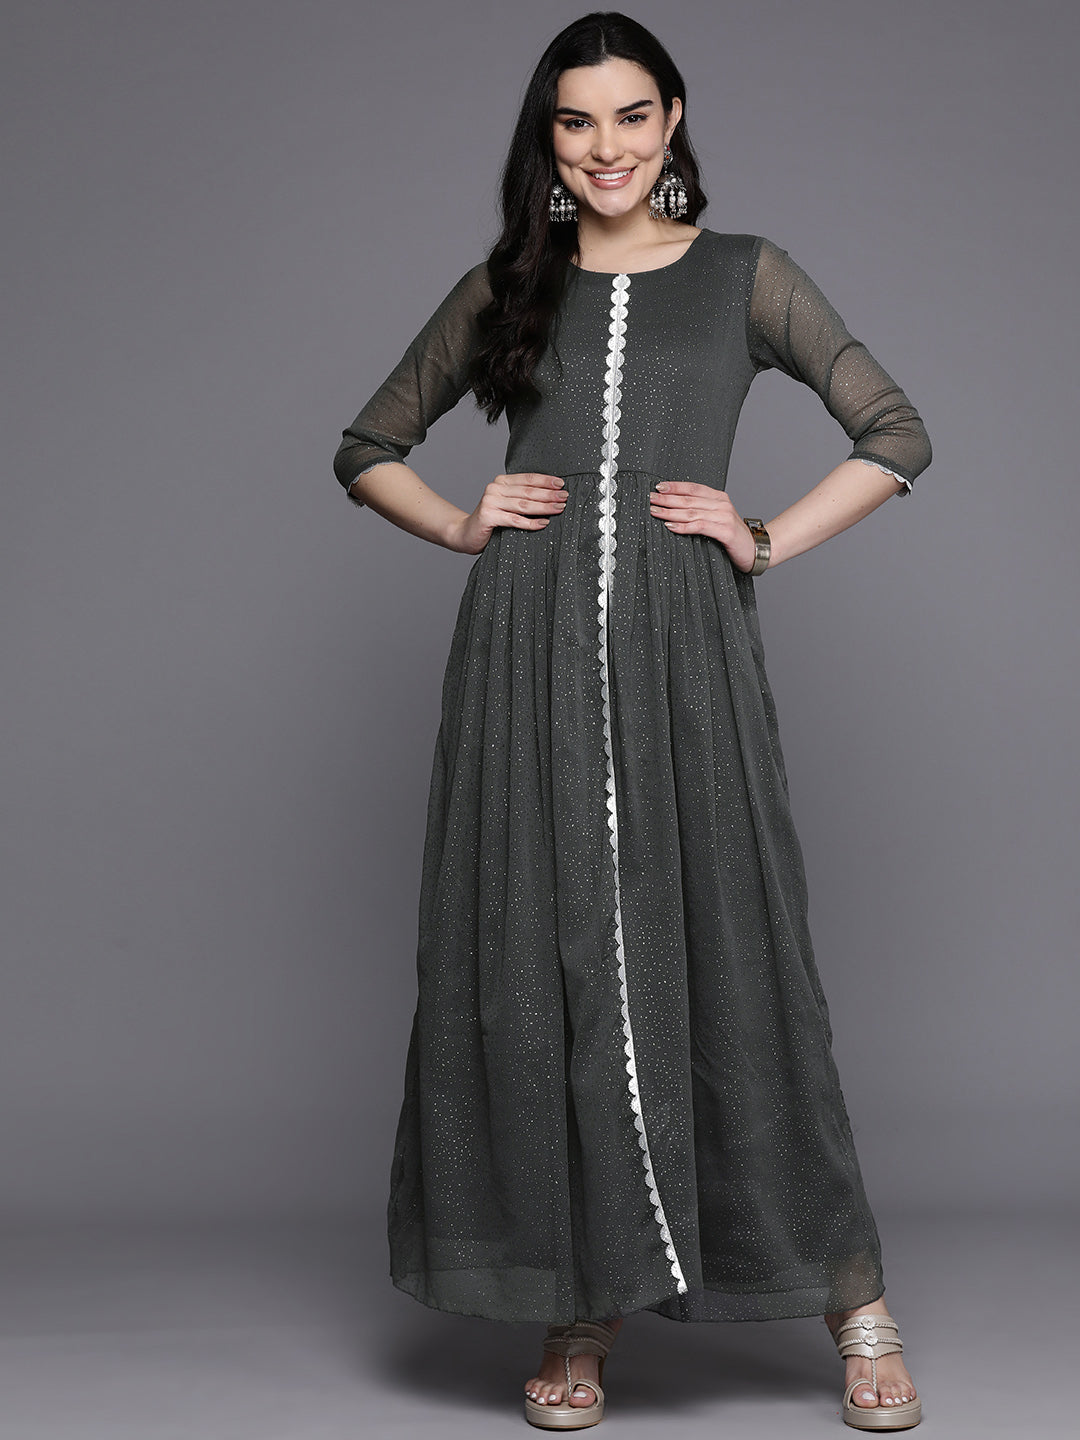 Grey Abstract Print Layered A-Line Maxi Ethnic Dress